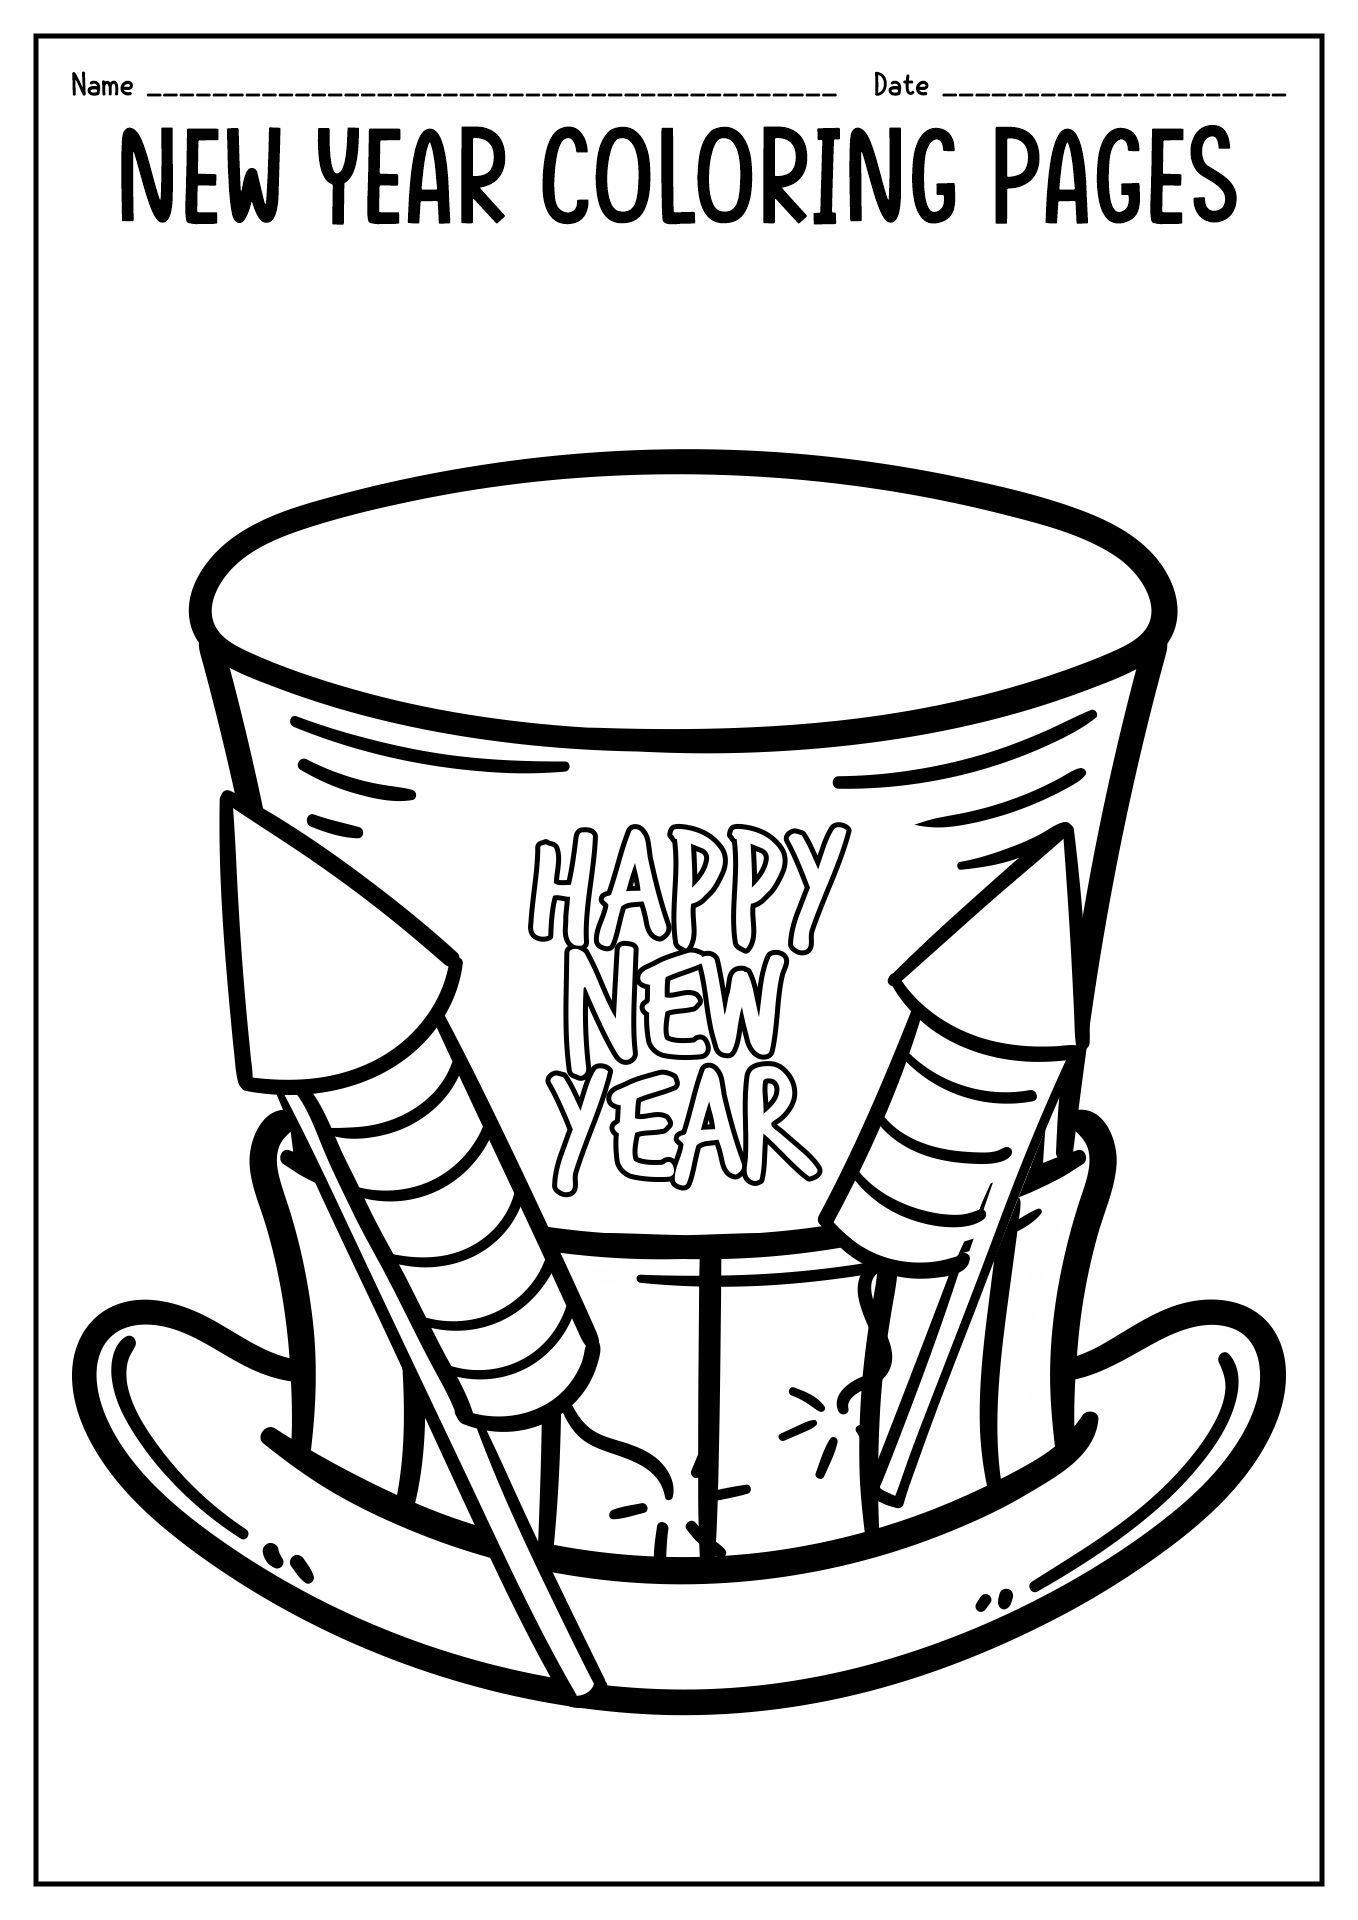 New Years Coloring Pages Image